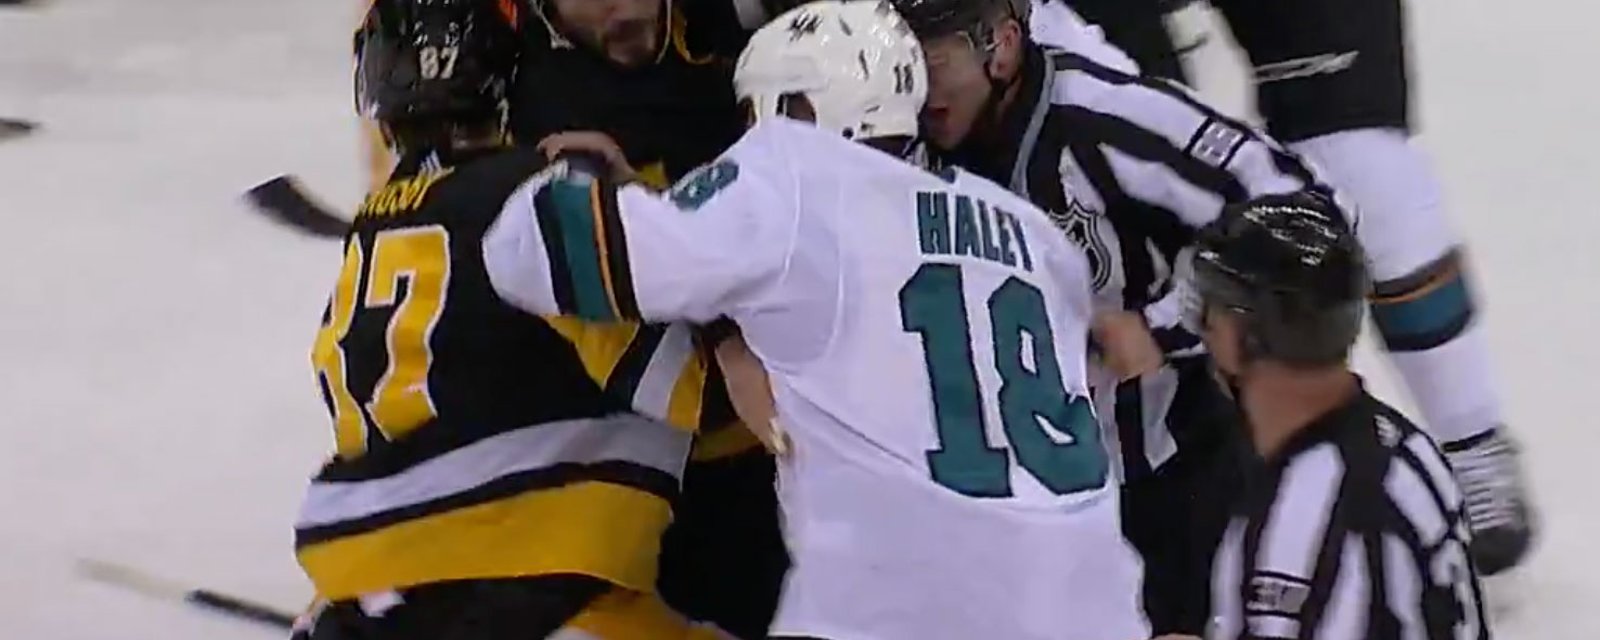 Pens and Sharks get in line brawl during commercial break, 4 players get thrown out of the game including Crosby! 